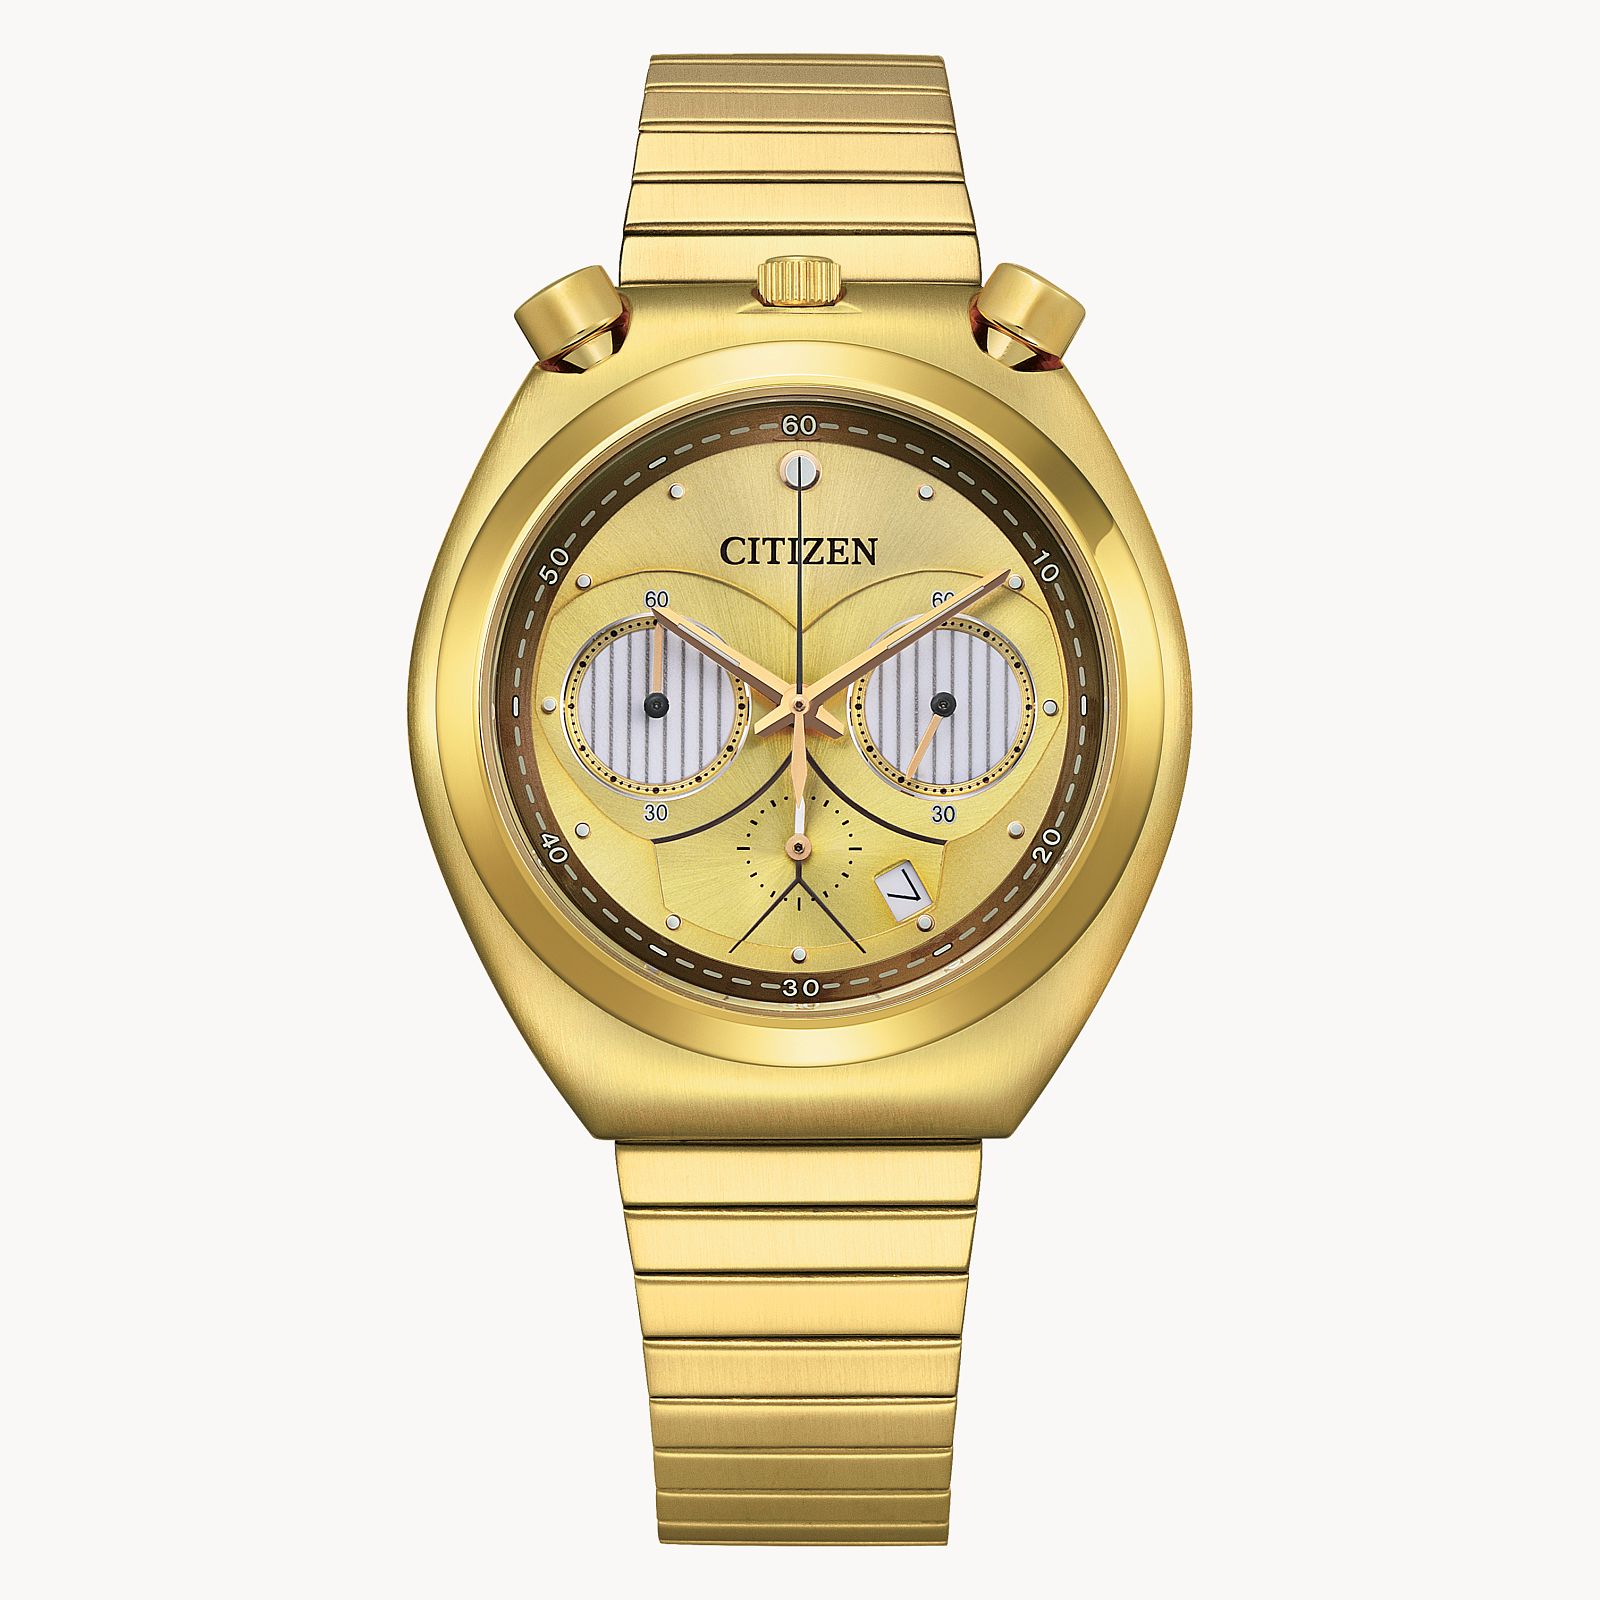 C-3PO Citizen Watch - Gold watch with C-3PO on watch face 